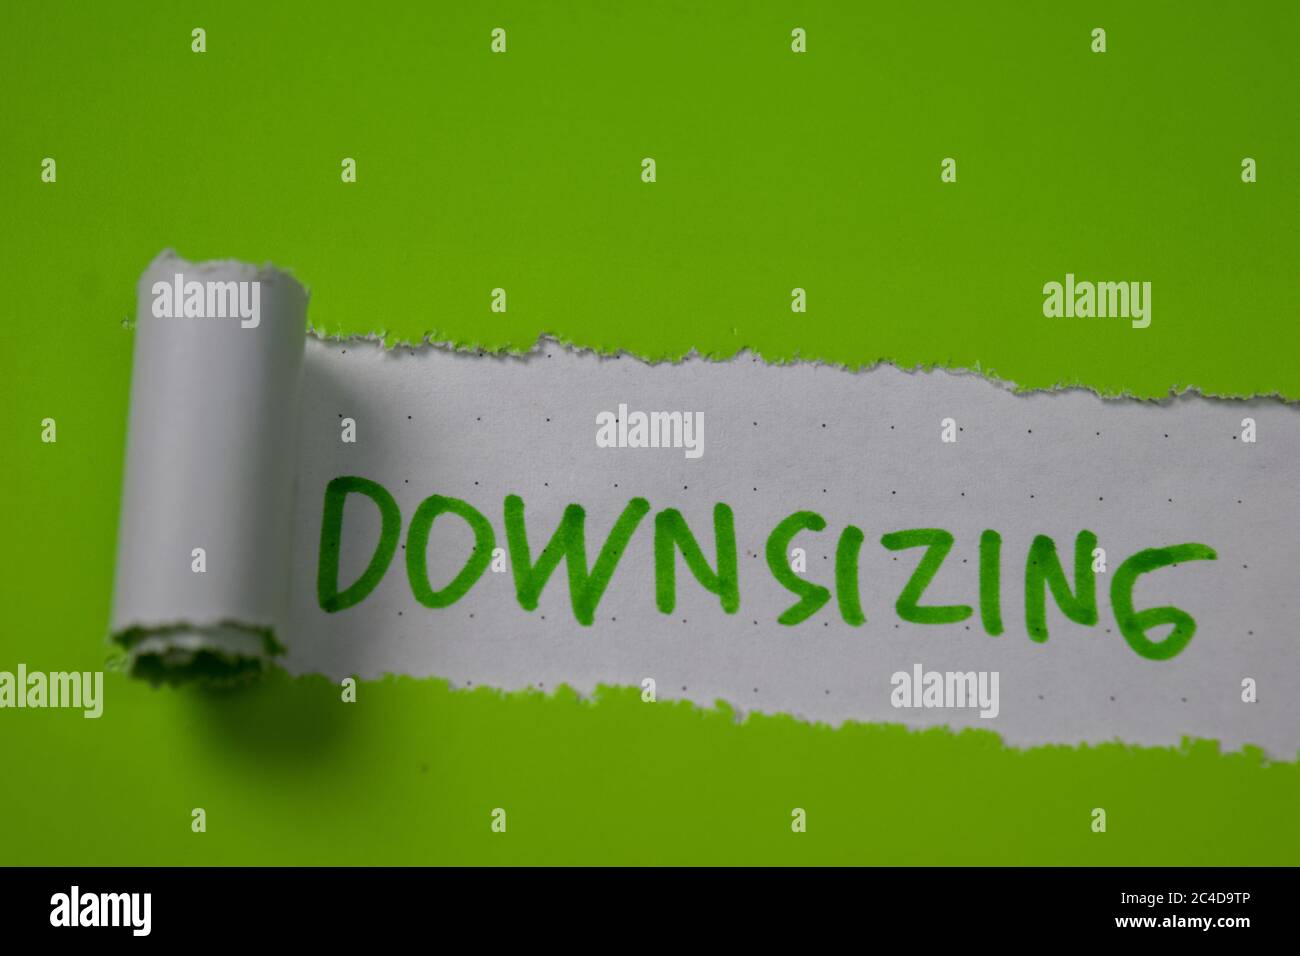 Downsizing Text written in torn paper Stock Photo